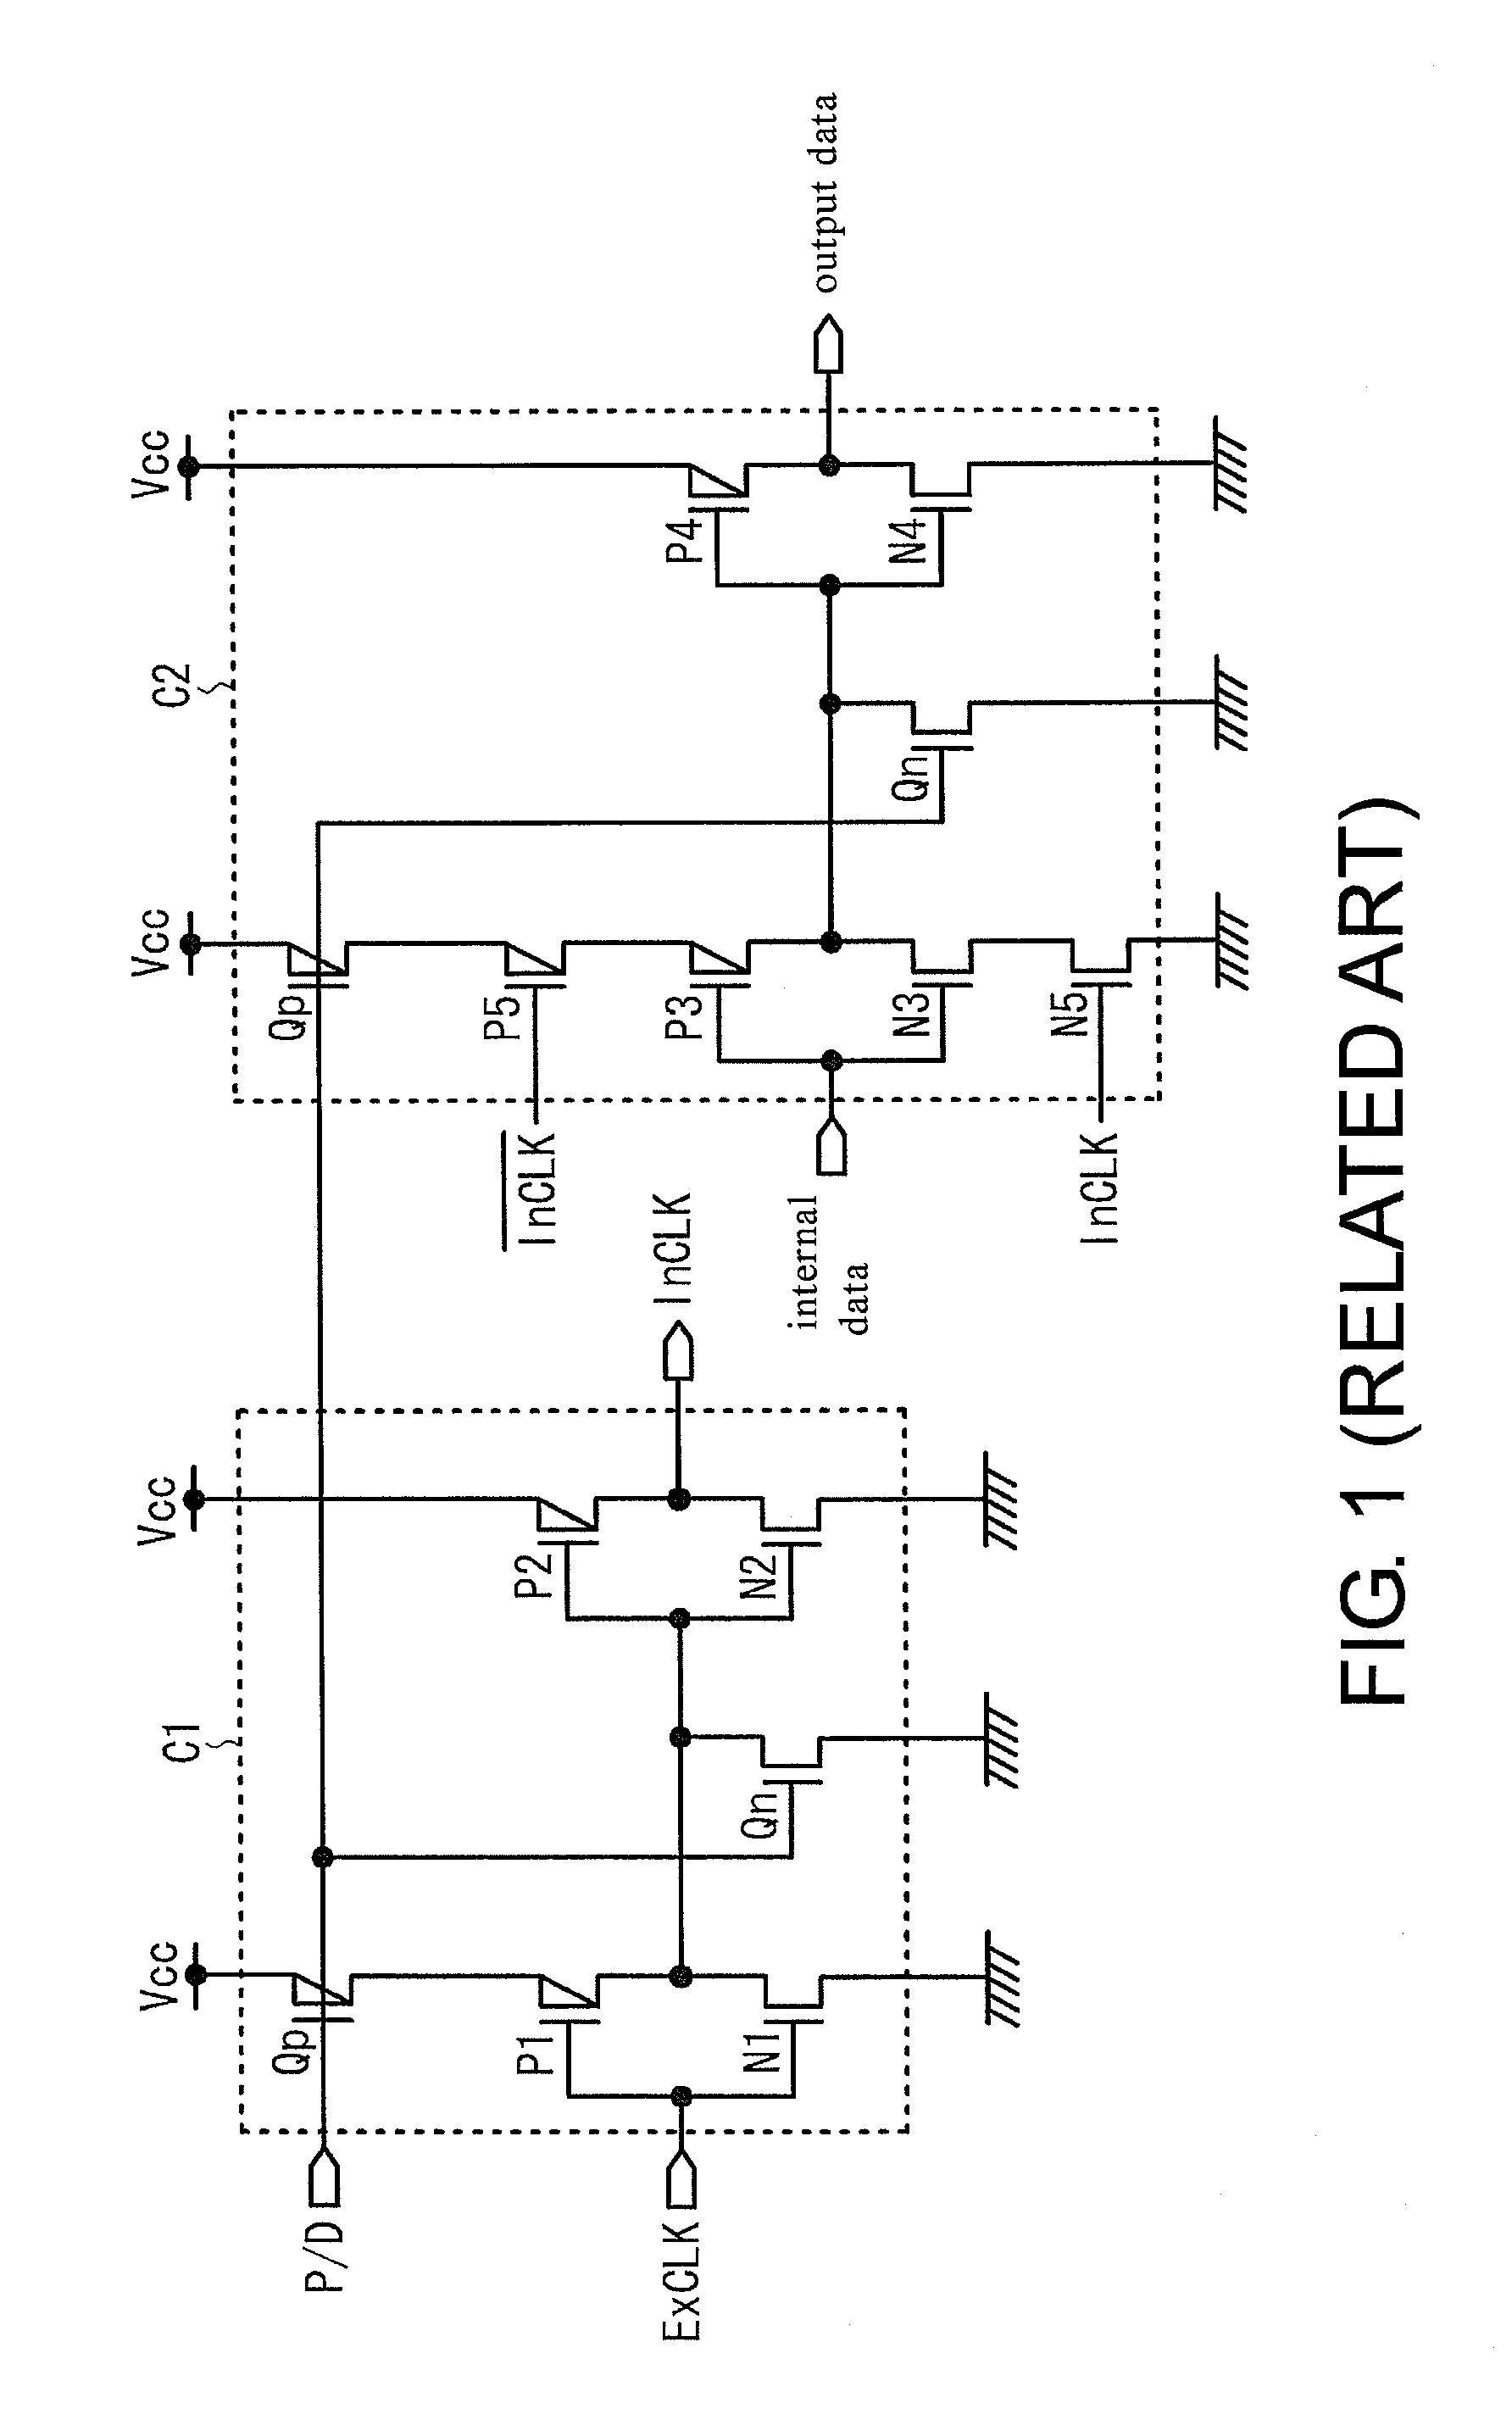 Semiconductor memory device with a clock circuit for reducing power consumption in a standby state